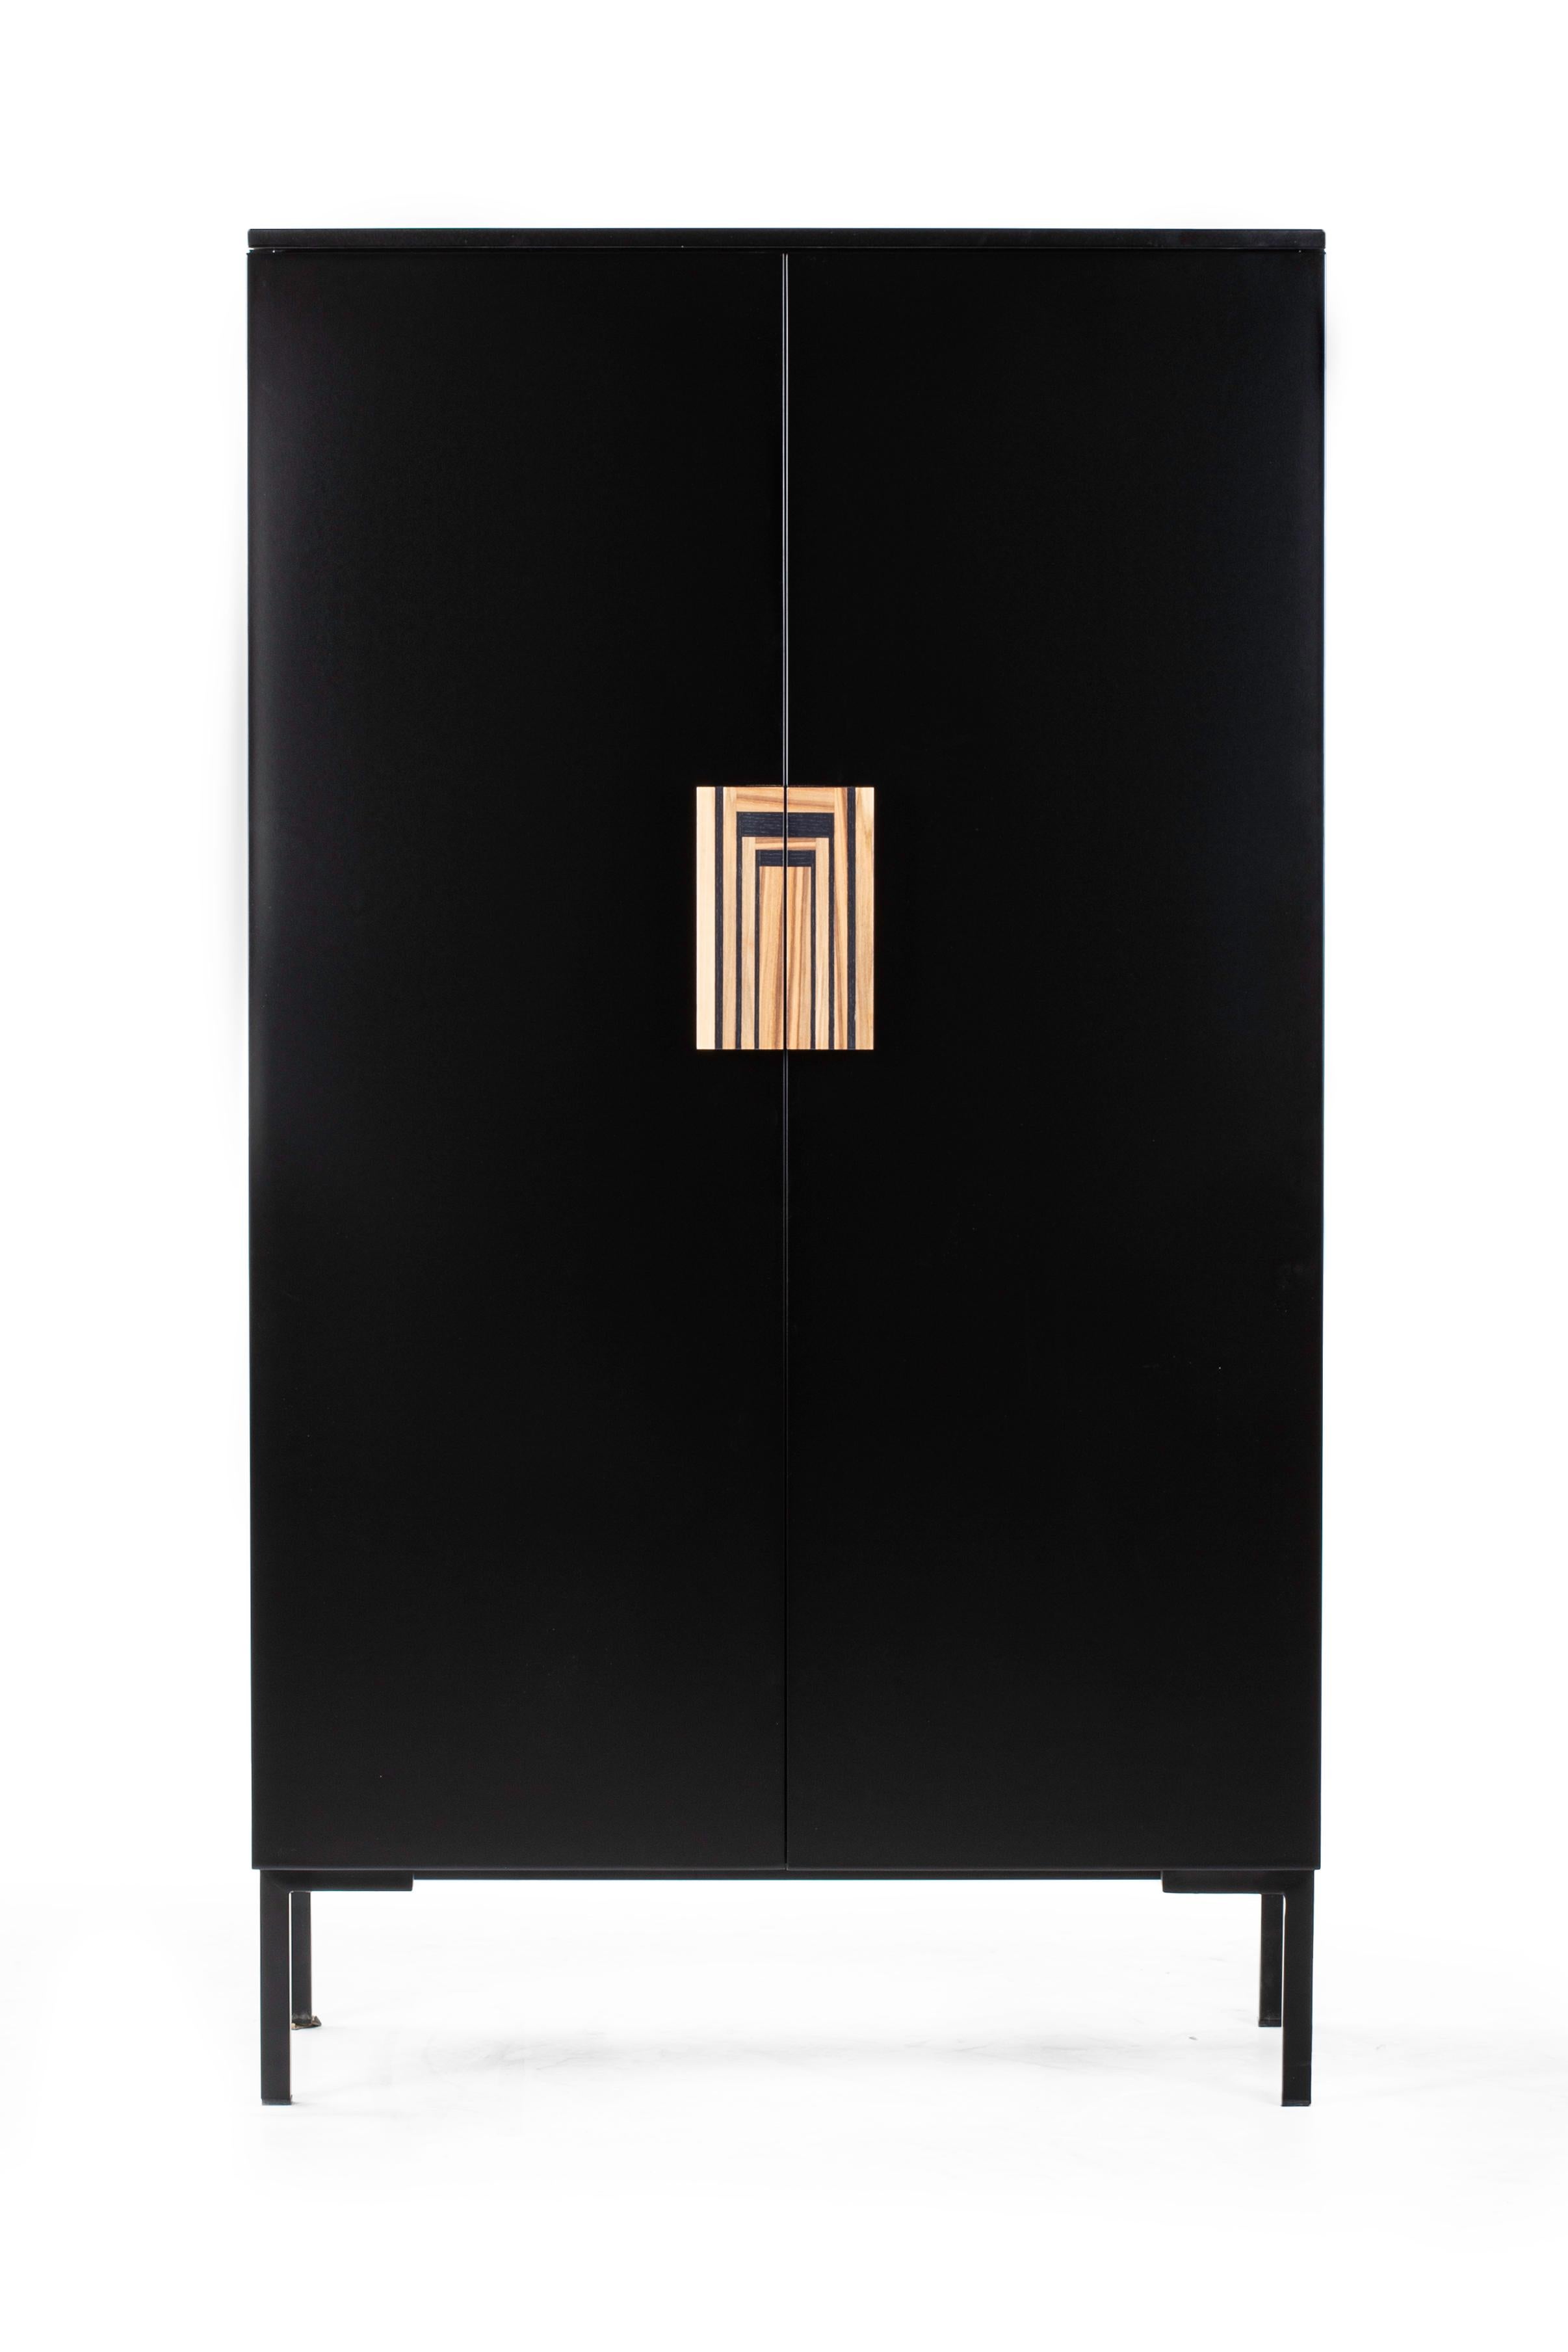 A splendid and elegant design that will imbue a refined contemporary interior with utmost sophistication, this cabinet will elevate the style of an entryway decor. Superbly handcrafted of black-lacquered wood, it features hand-inlaid handles made of